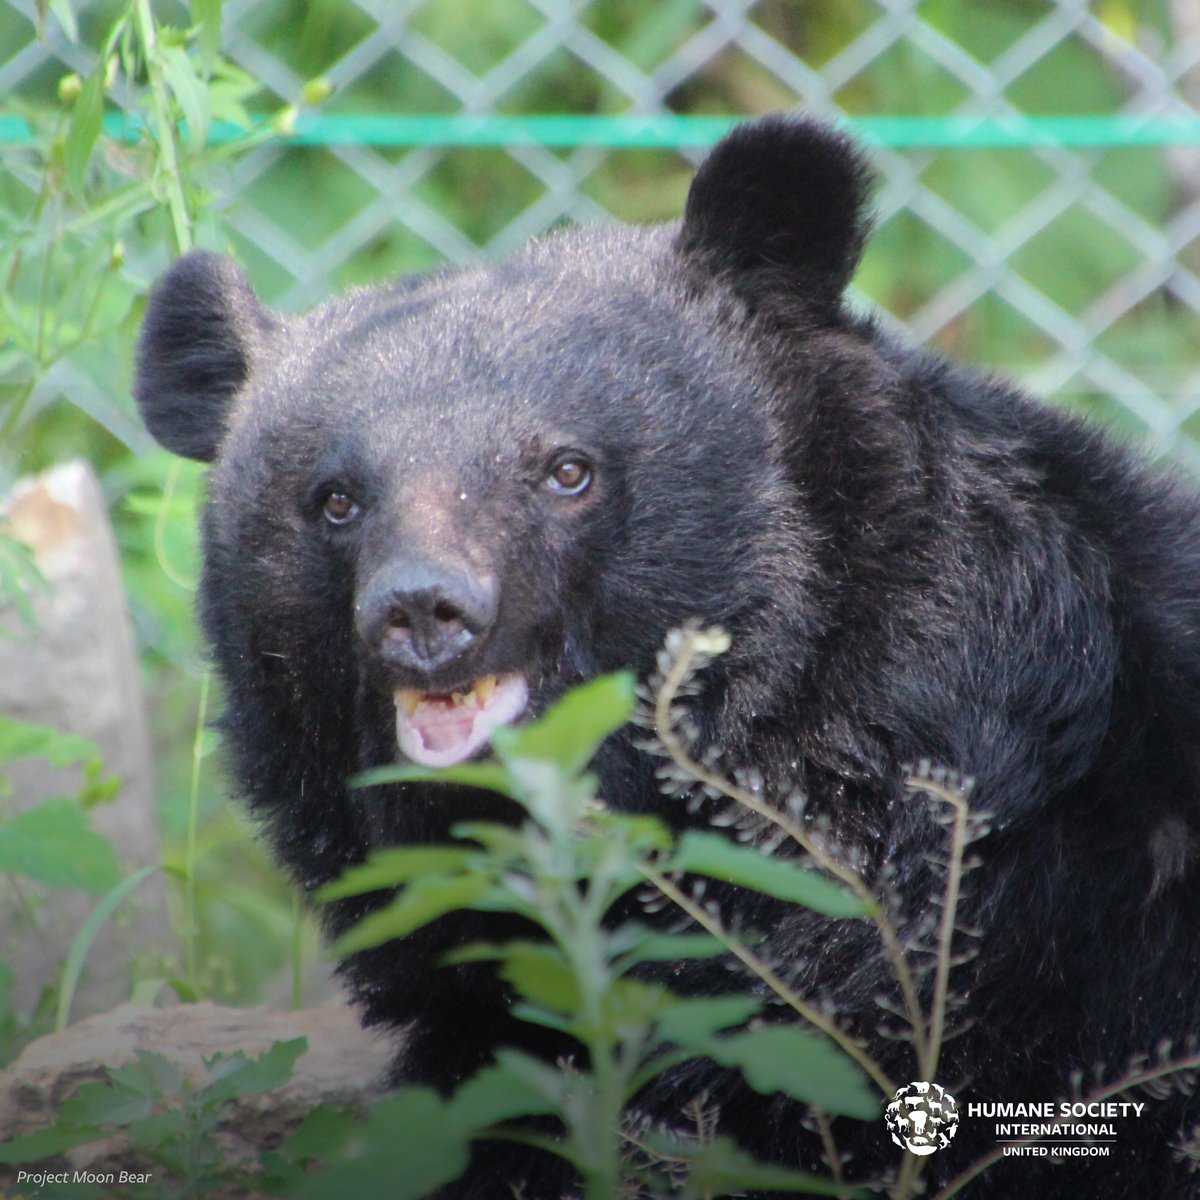 Since 2022 HSI/Korea has supported a bear protection group, Project Moon Bear. ⁣ This bear was rescued from a horrific bear bile farm where he was caged and subjected to painful bile extraction. ⁣Now he enjoys climbing trees, eating fresh fruit and exploring his mini sanctuary!